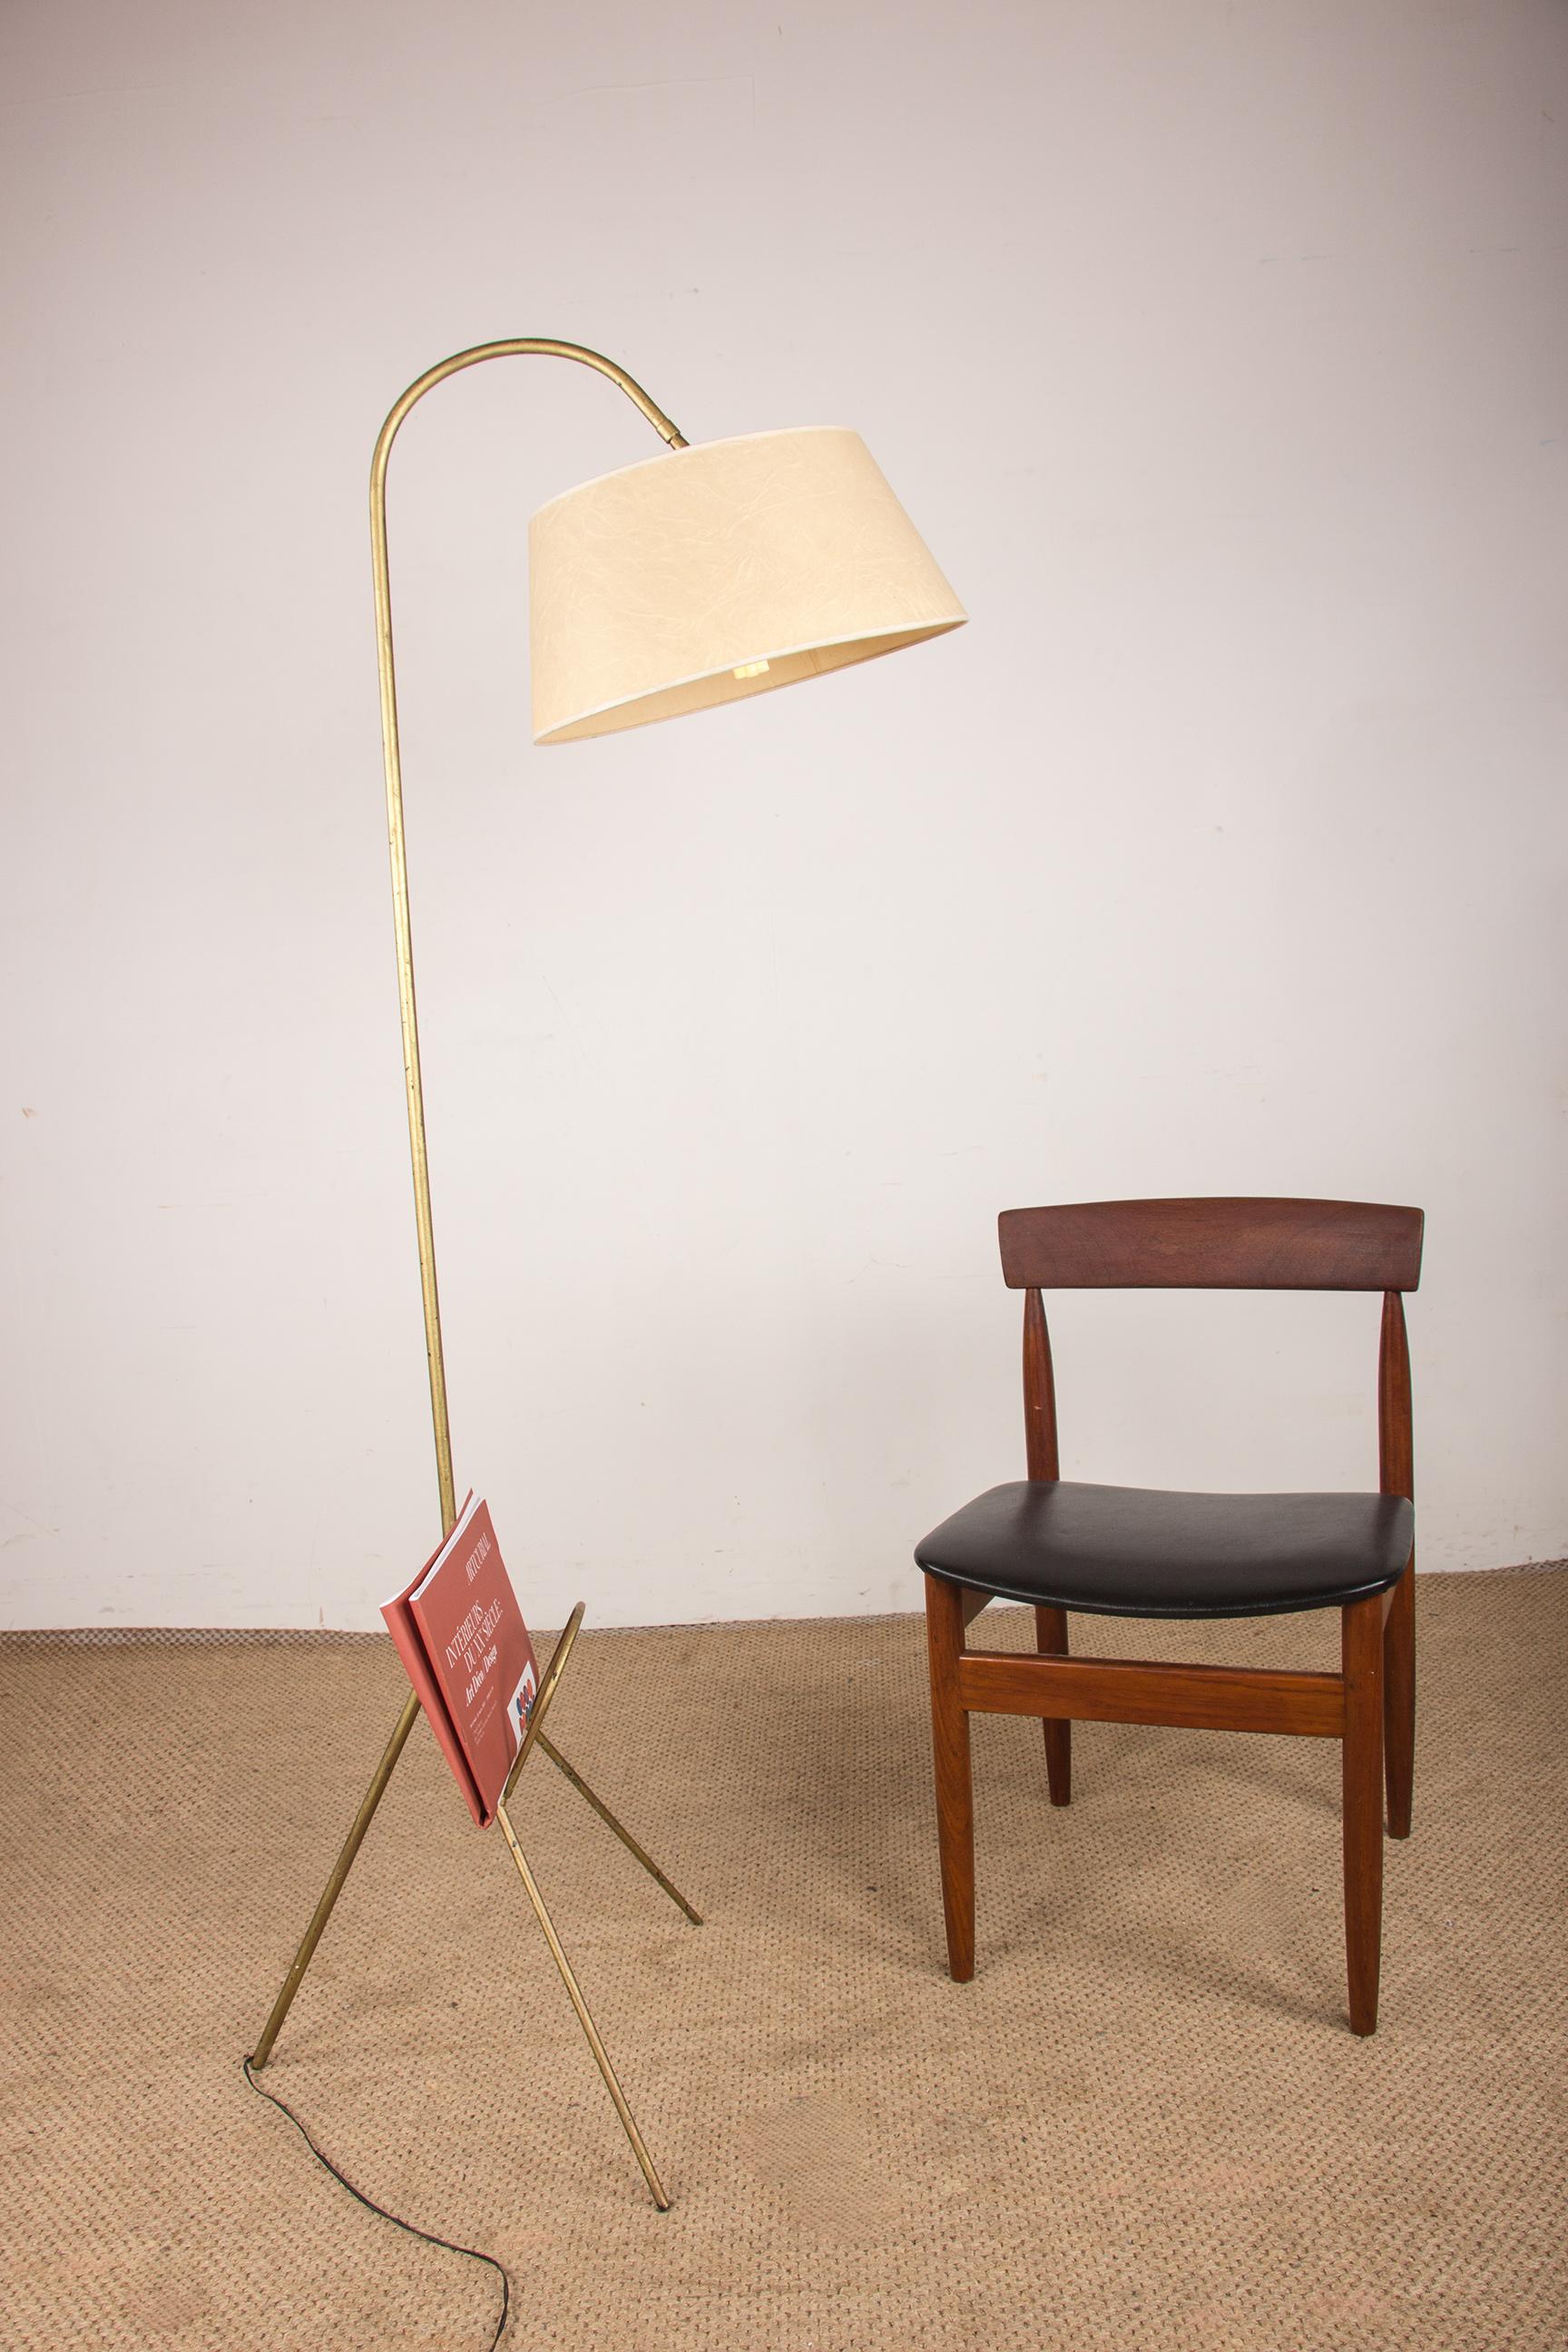 Superb floor lamp from the 1950s/1960s. Extremely clean design, all curves and straight lines. The clever shape of the tripod base provides a simple and functional magazine rack. Speckled metal structure. Very well made.
